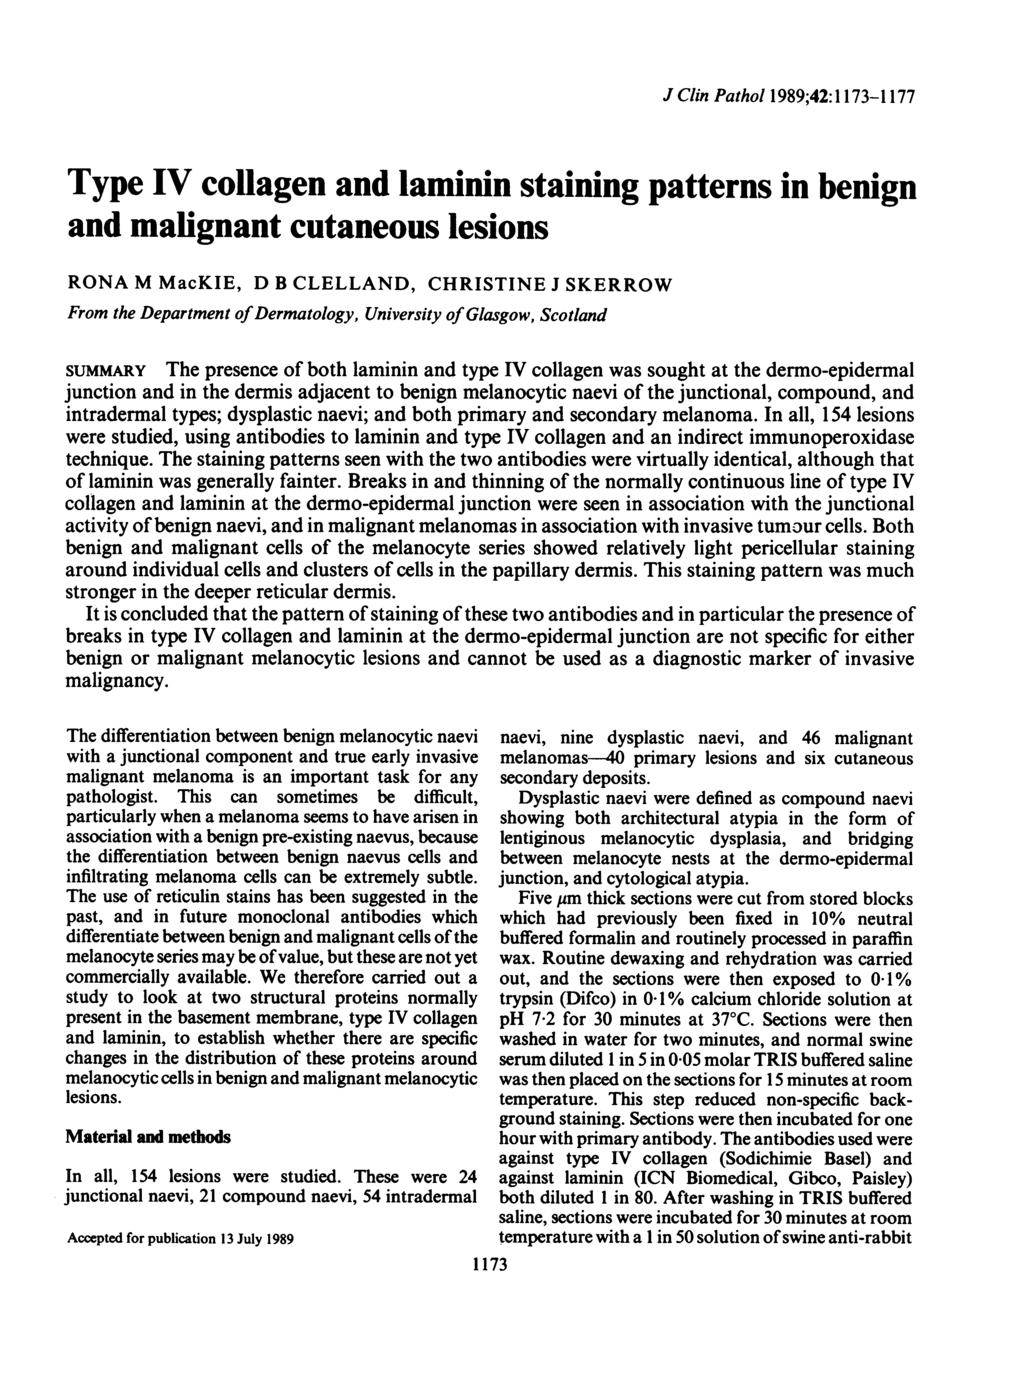 J Clin Pathol 1989;42:1173-1177 Type IV collagen and laminin staining patterns in benign and malignant cutaneous lesions RONA M MacKIE, D B CLELLAND, CHRISTINE J SKERROW From the Department